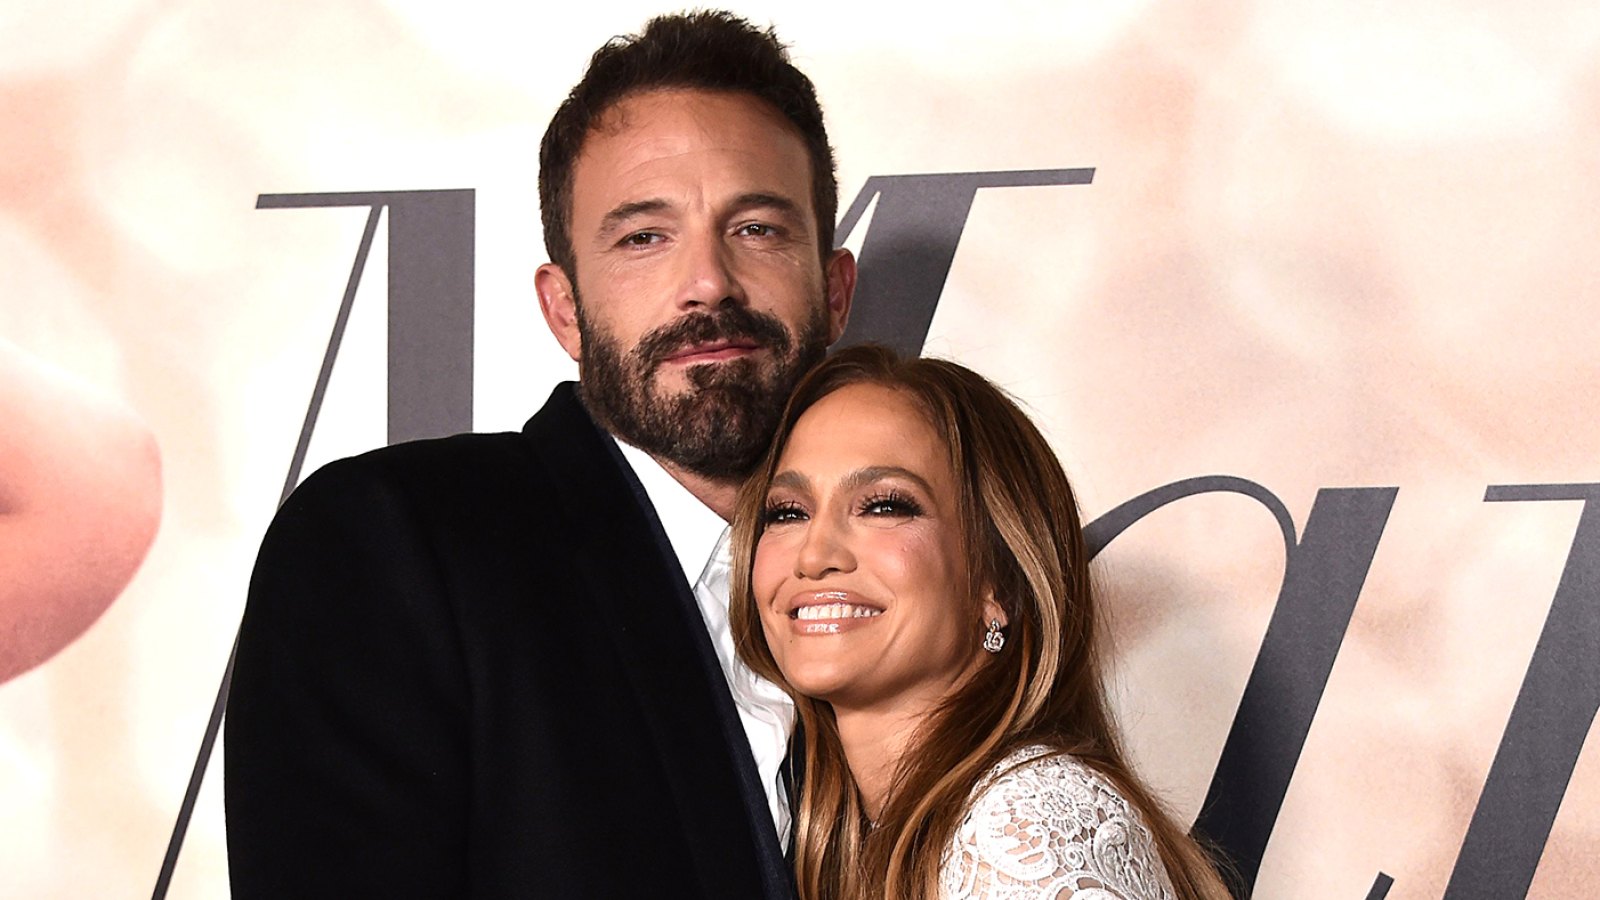 Jennifer Lopez Shares Sweet Video With Ben Affleck: 'I Found the Person Who Makes Me the Happiest I Have Ever Been'